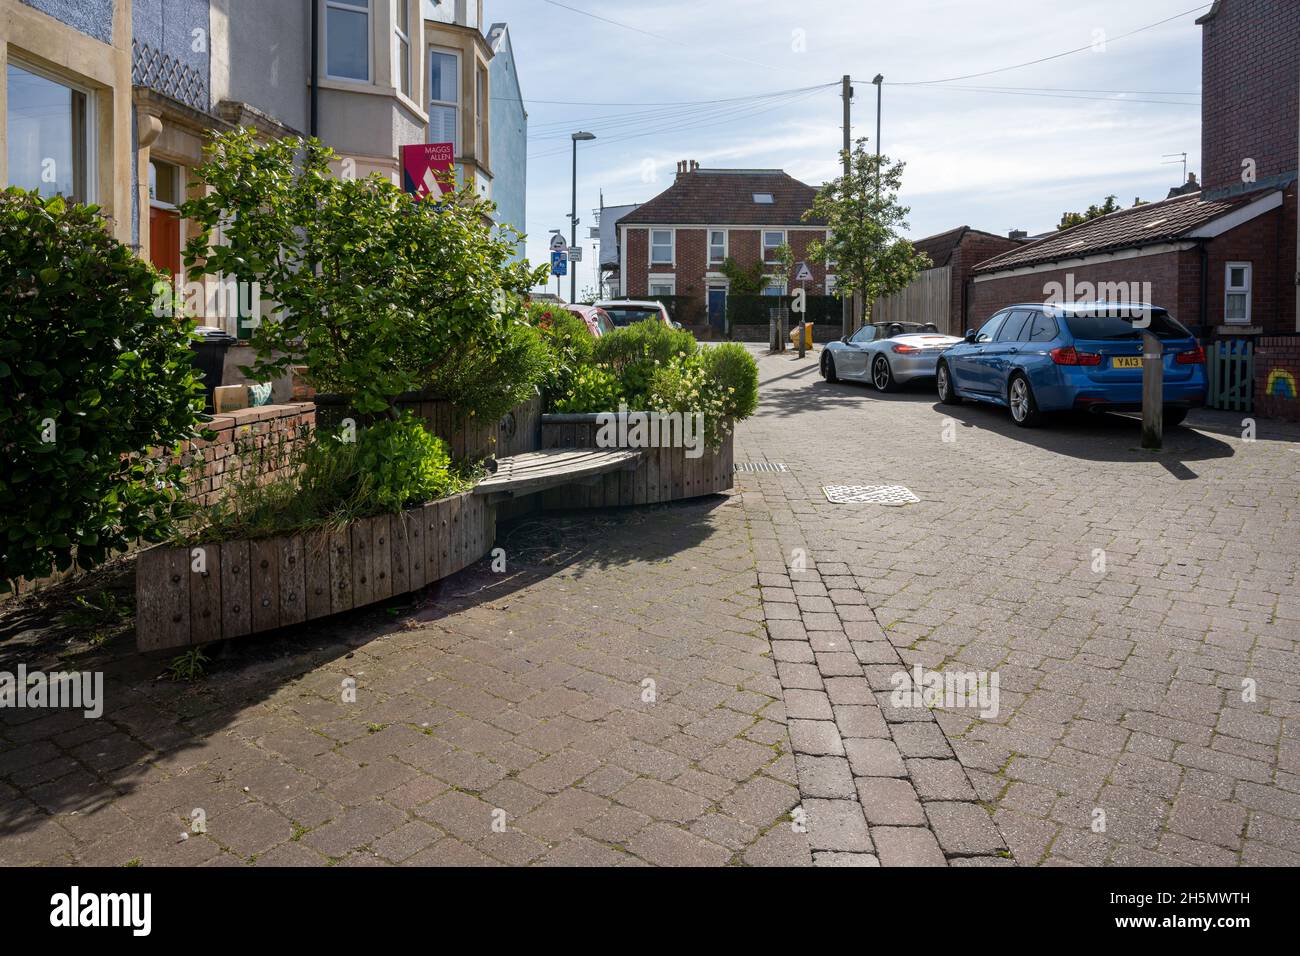 Benches, flower planters and a shared surface are designed to reduce traffic speeds and dominance in Milford Street 'Home Zone' in Southville, Bristol Stock Photo